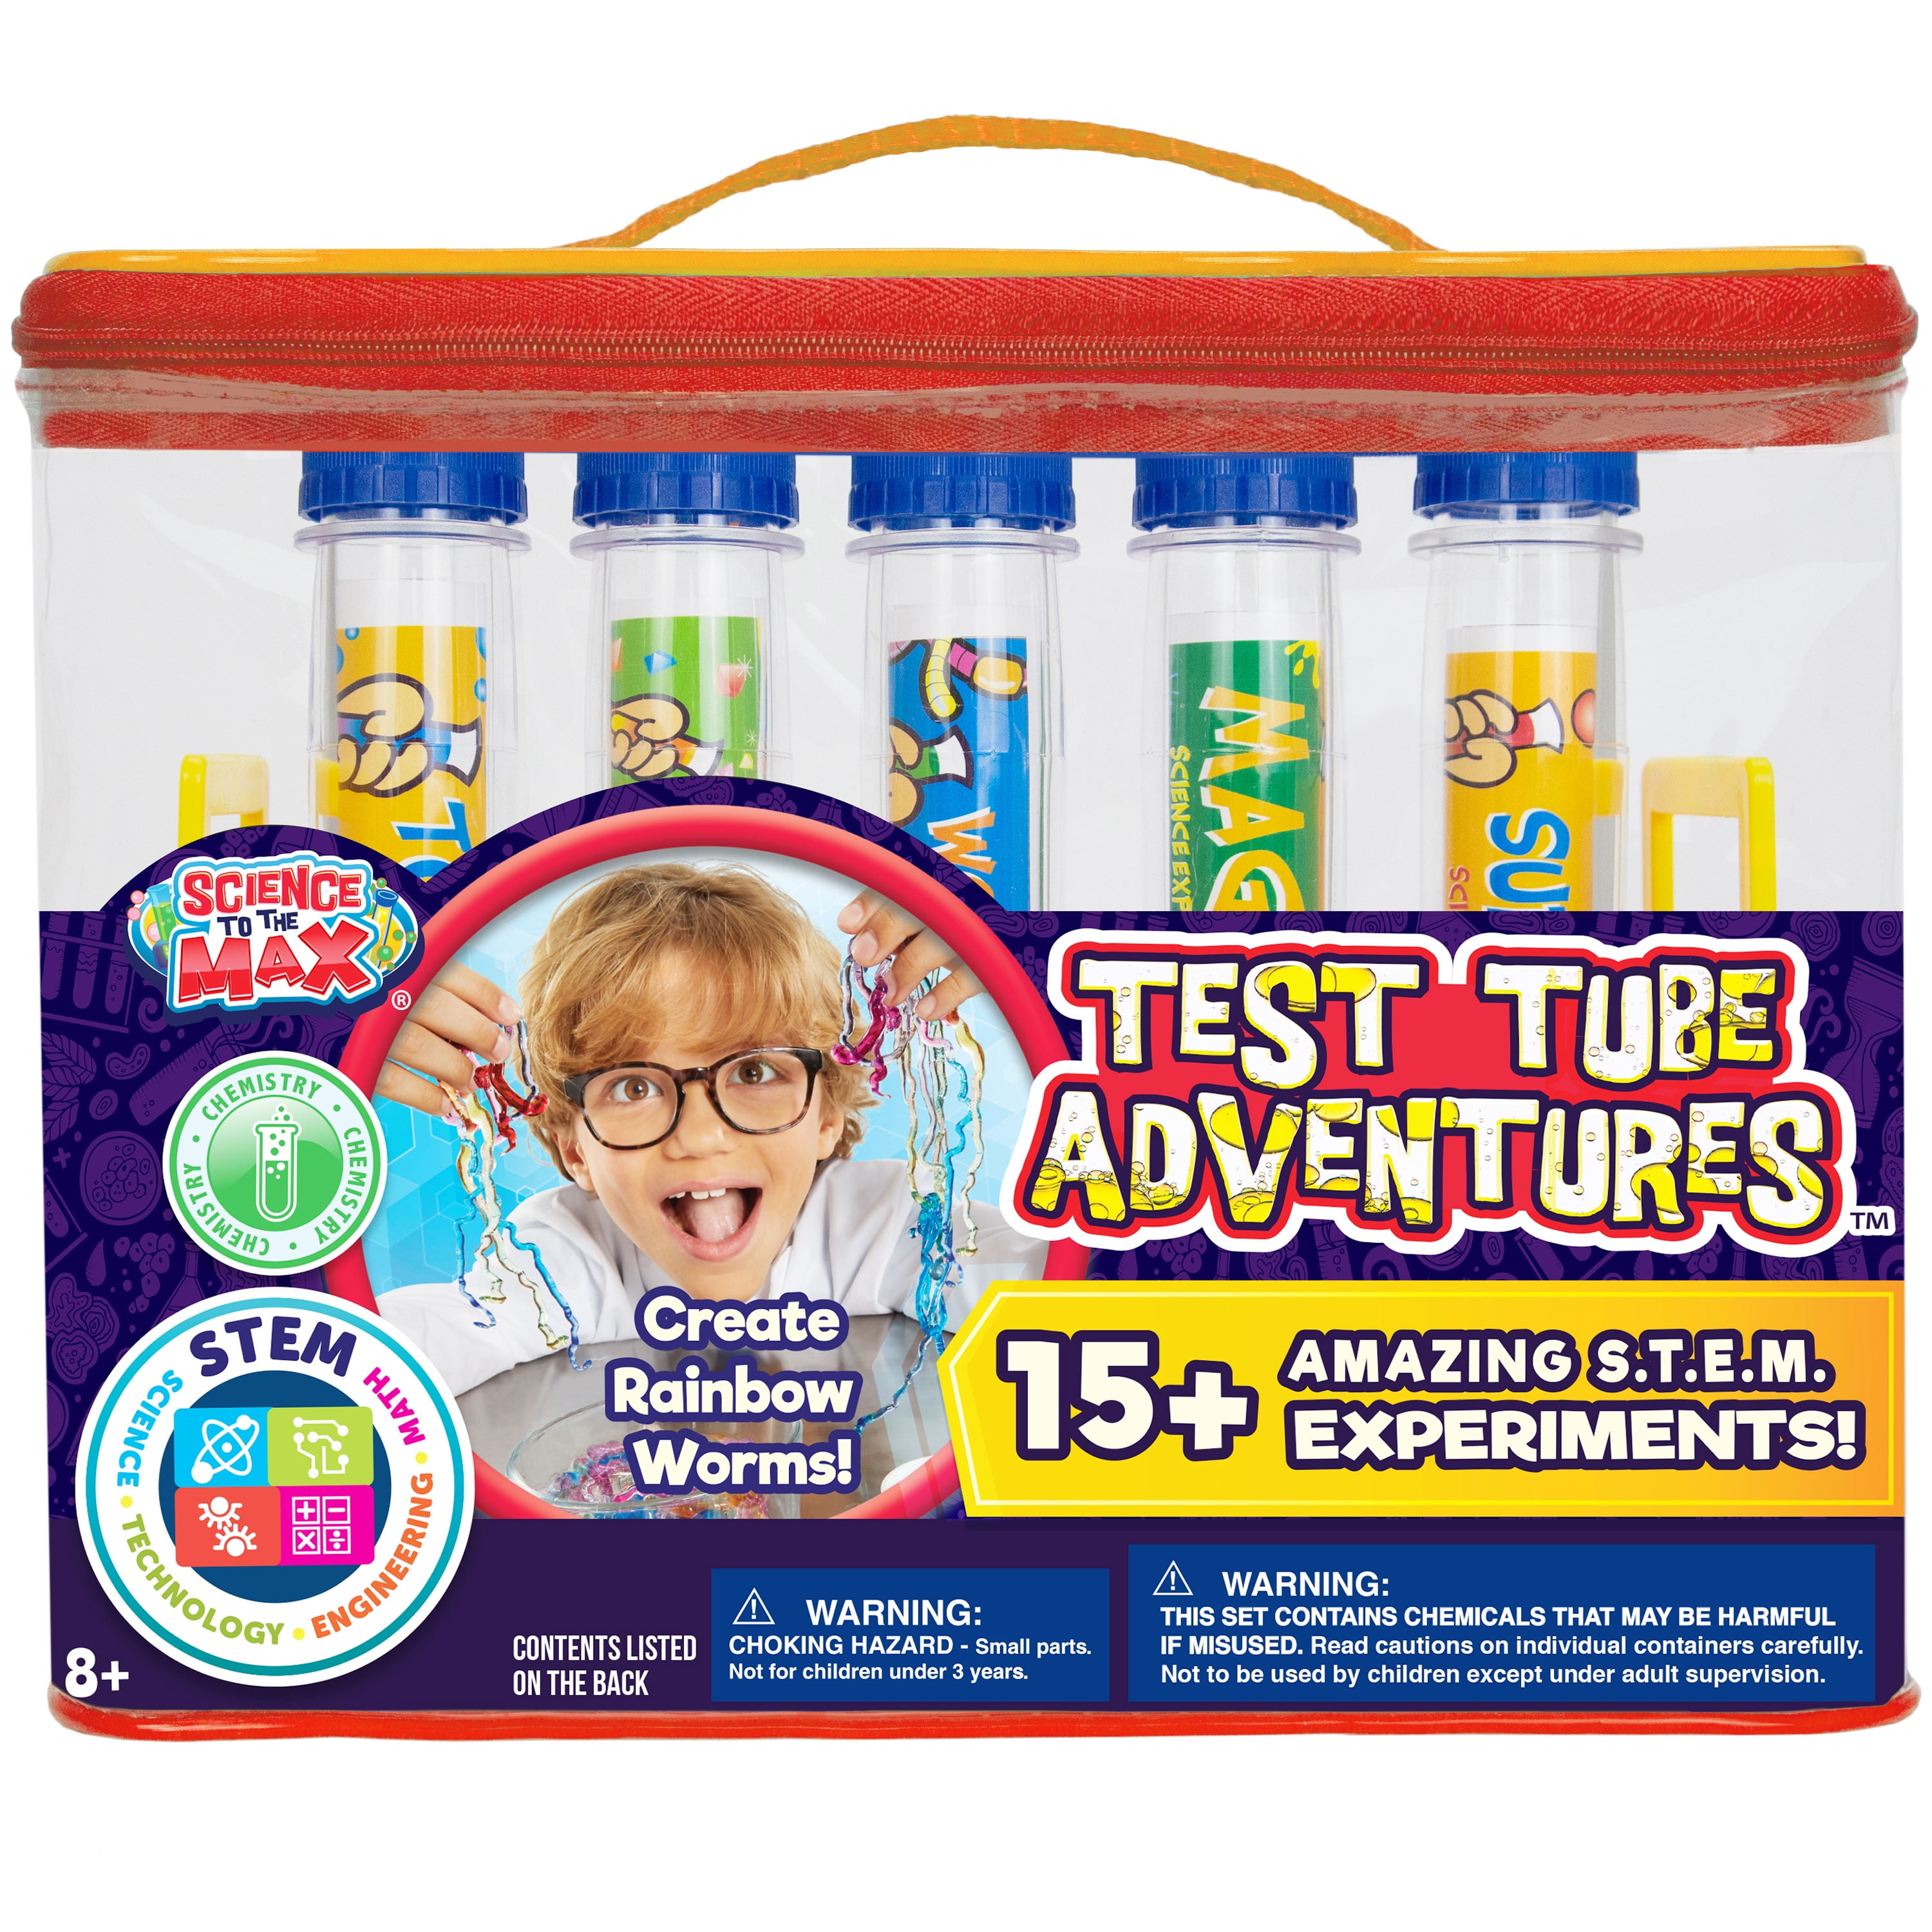 New Be Amazing Toys Big Bag of Science Works 